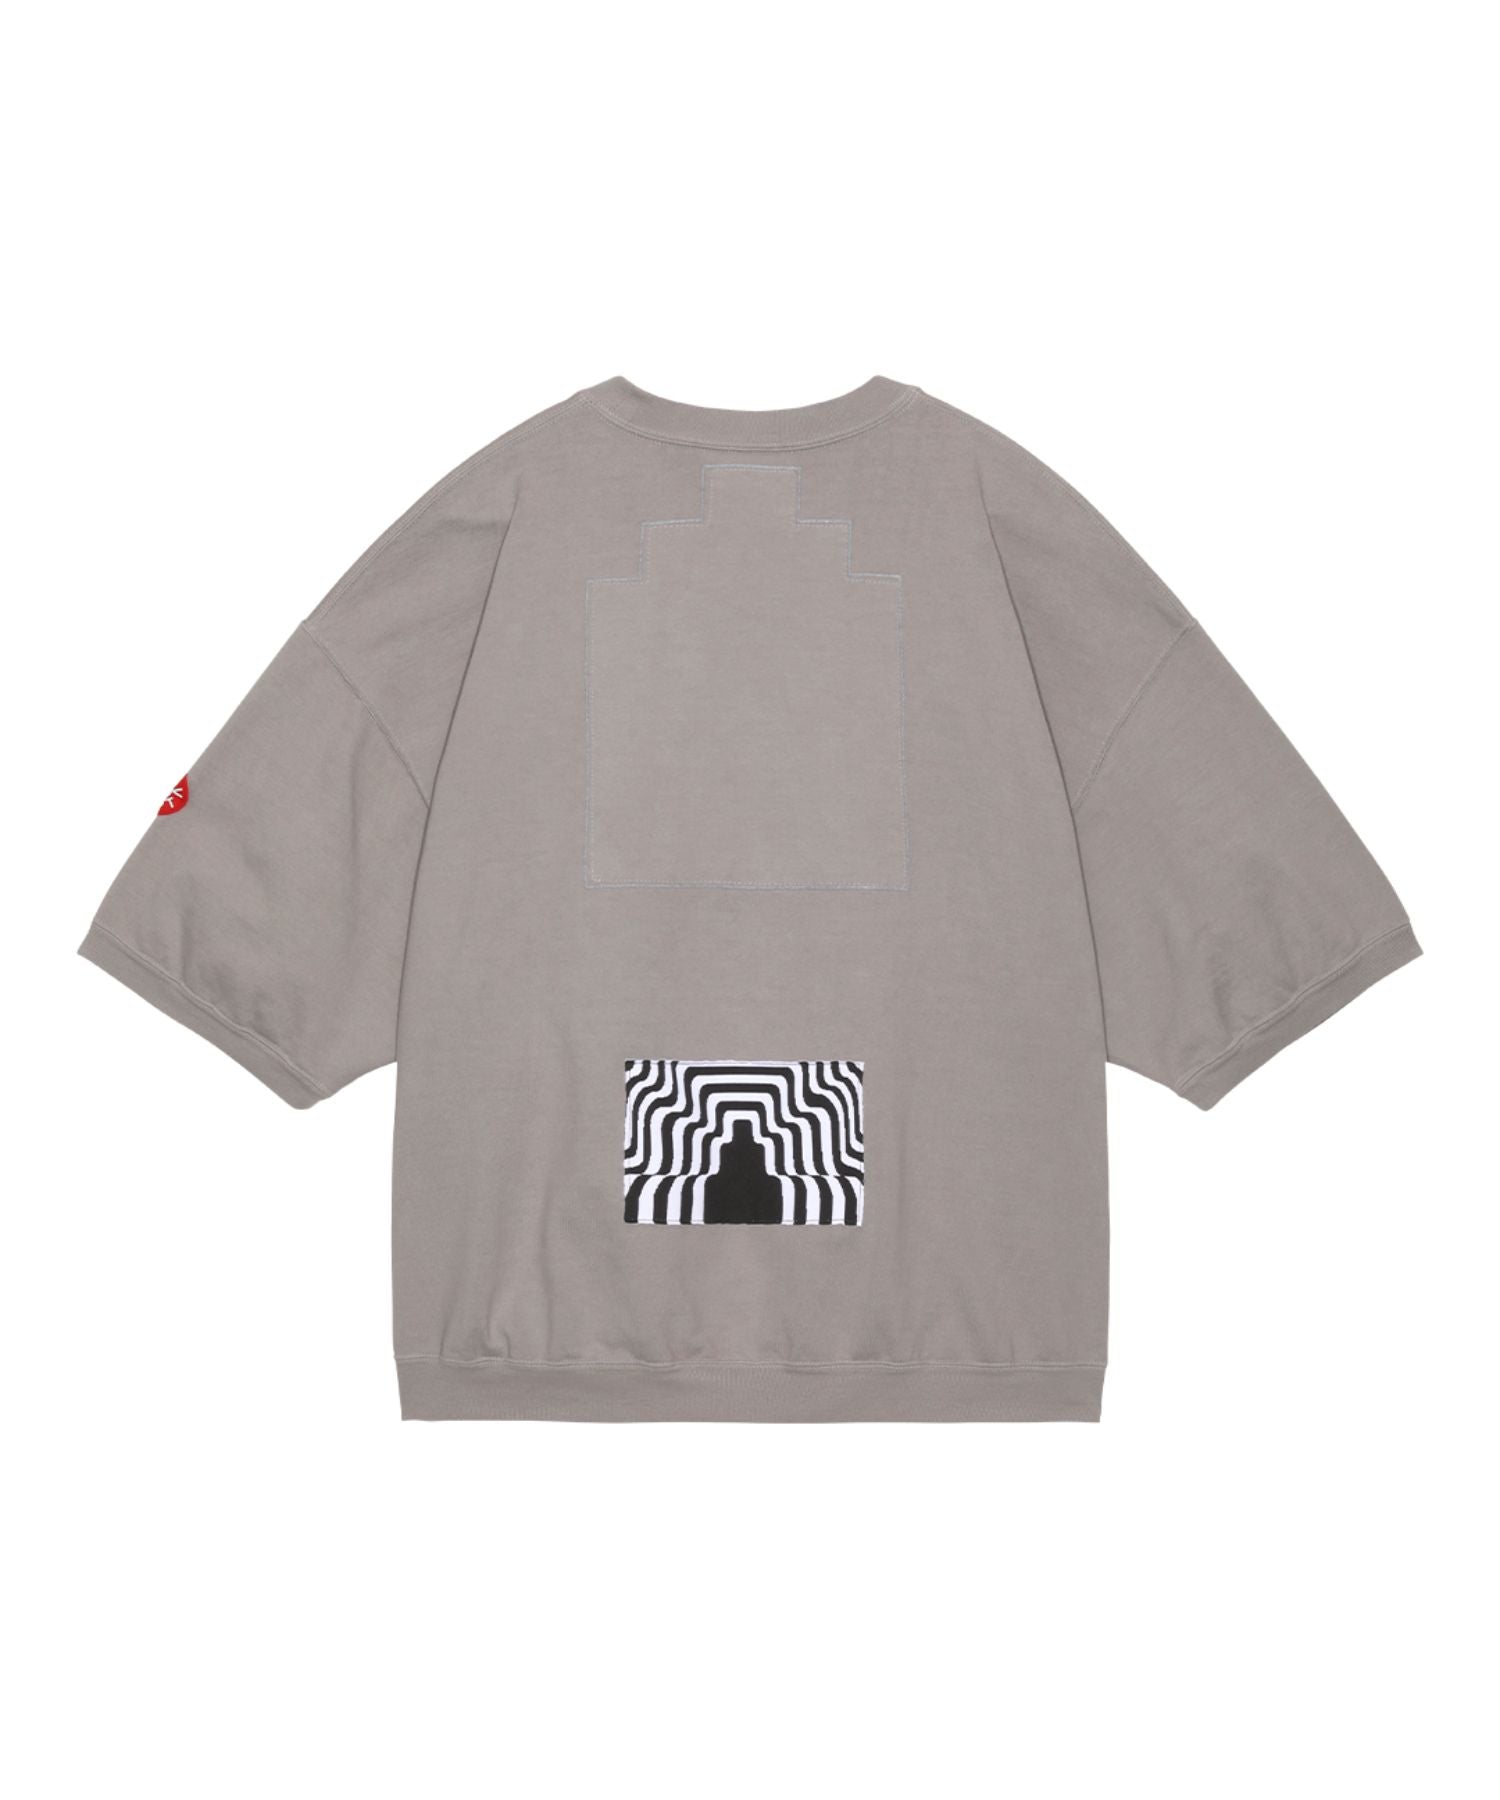 Overdye Patched Crew Neck